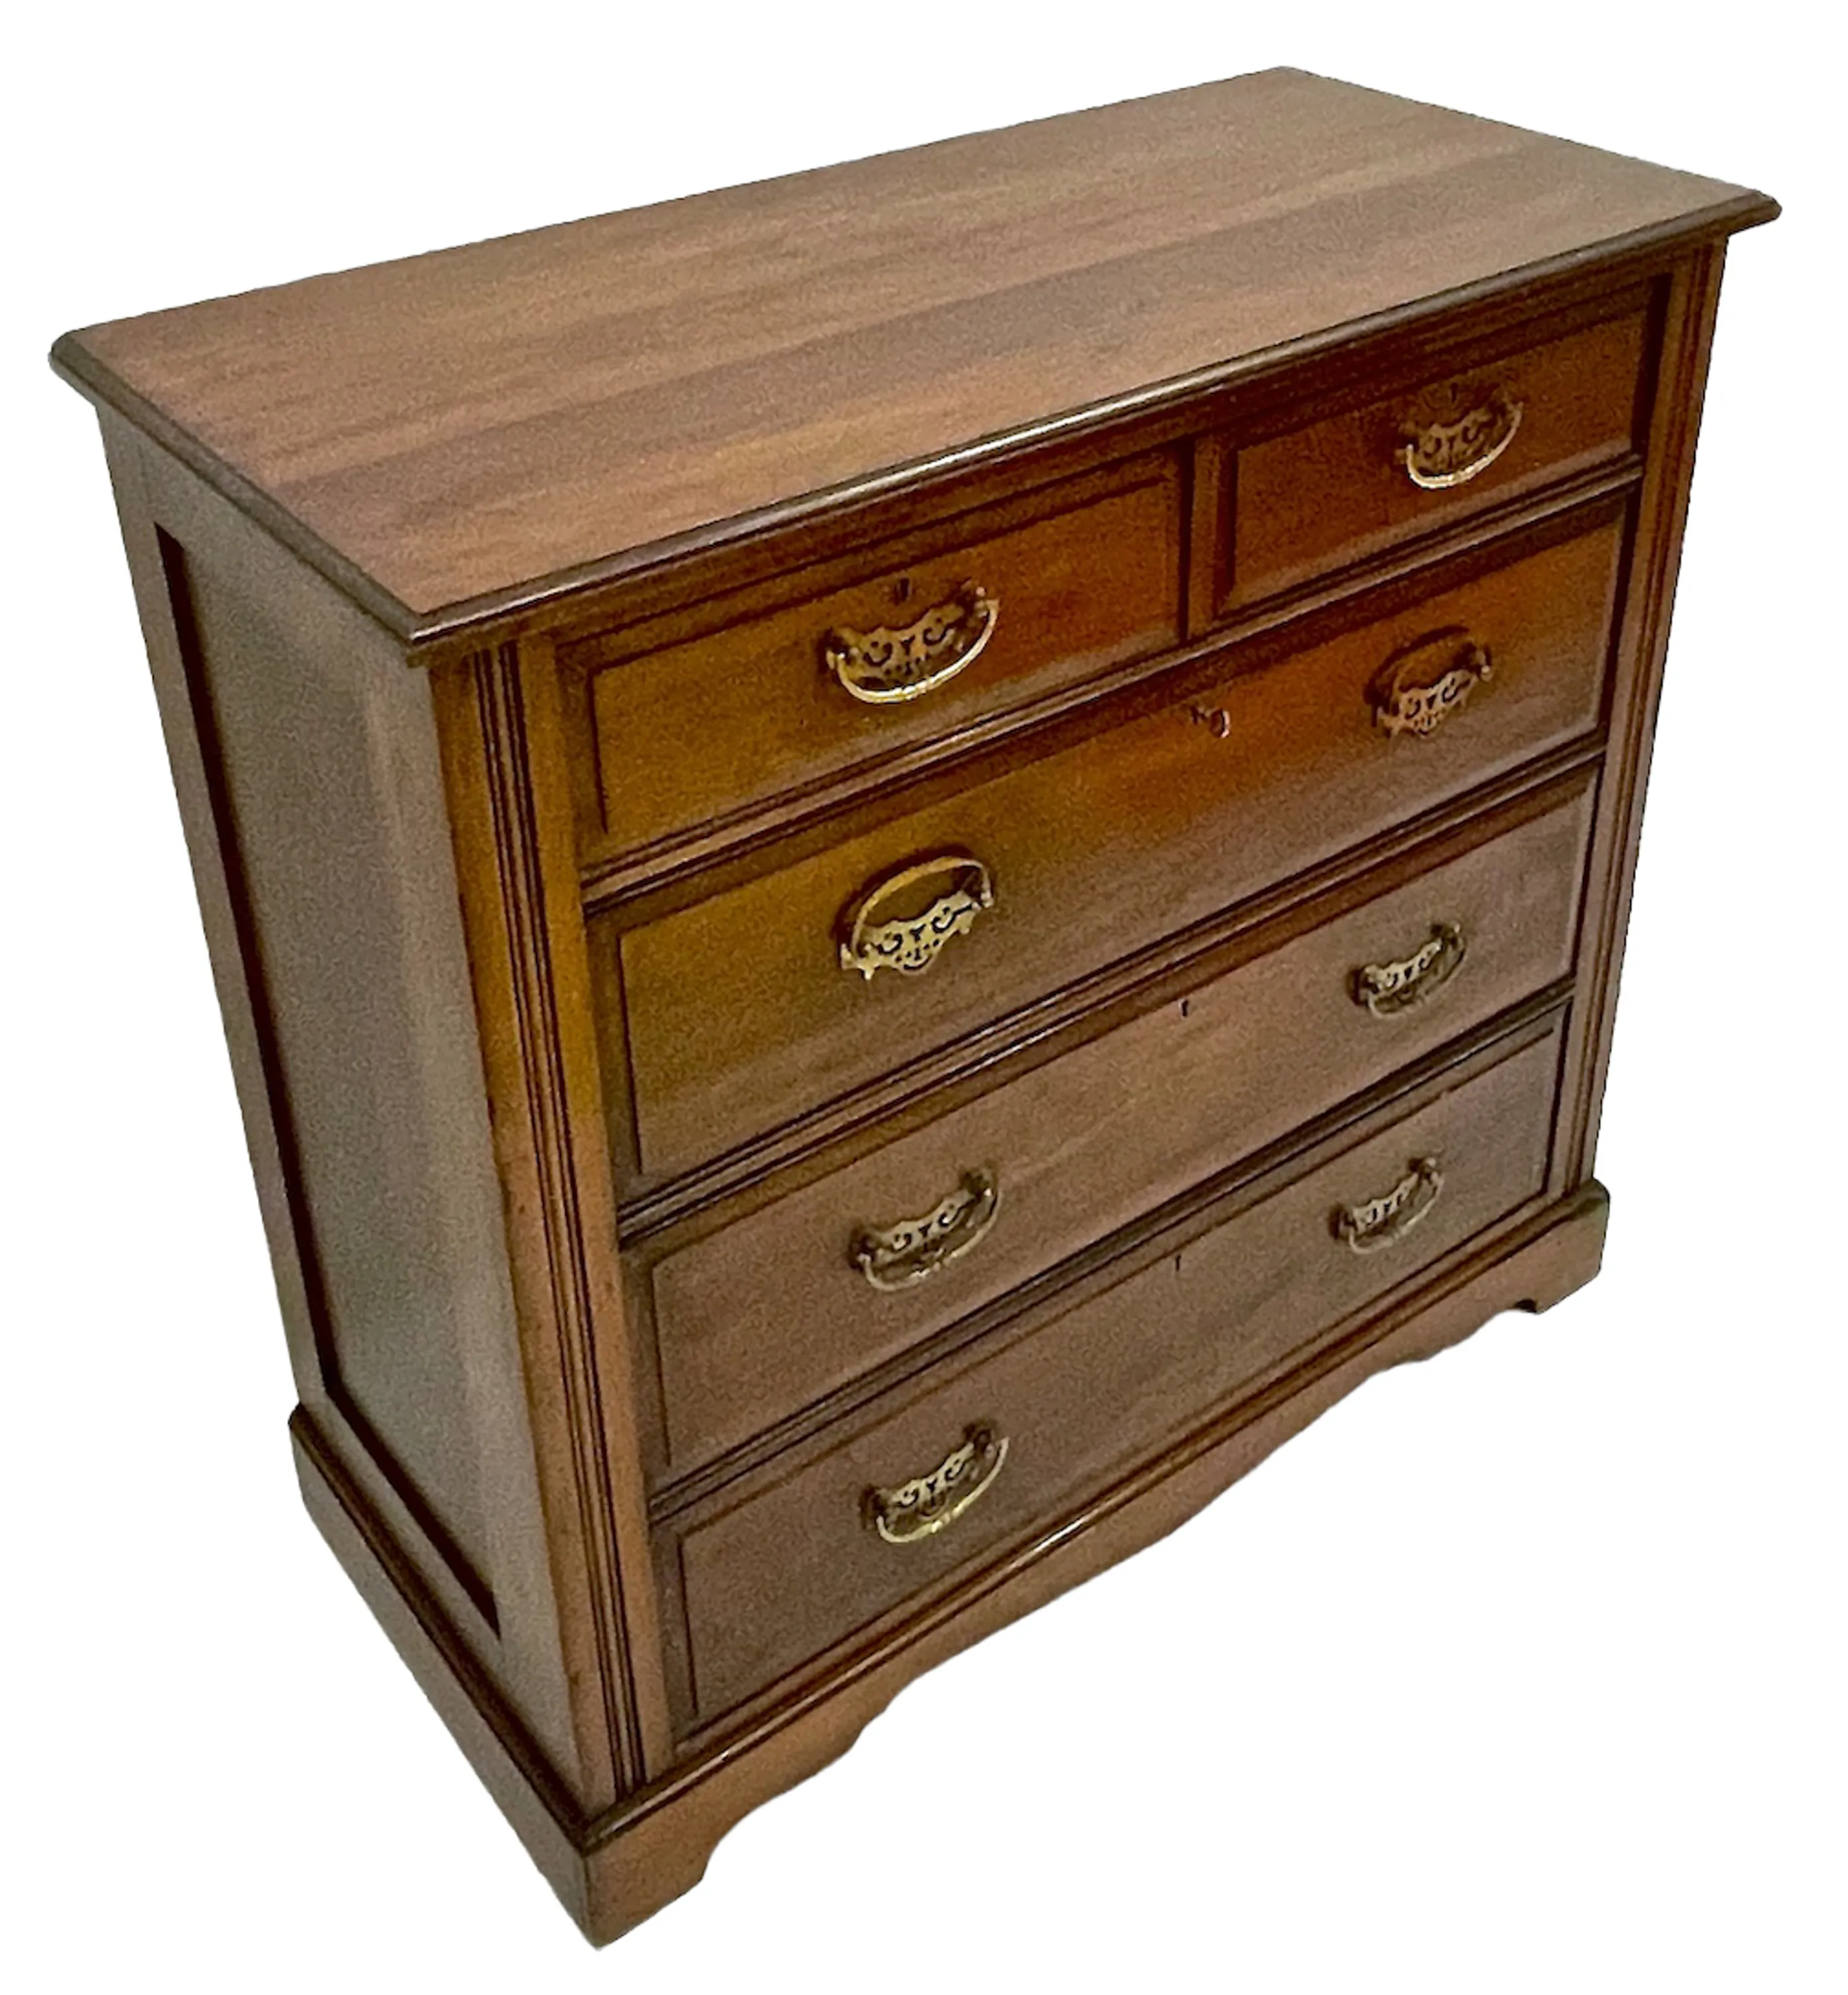 Traditional Style Chest Of Drawers - Vermilion Designs - Brown